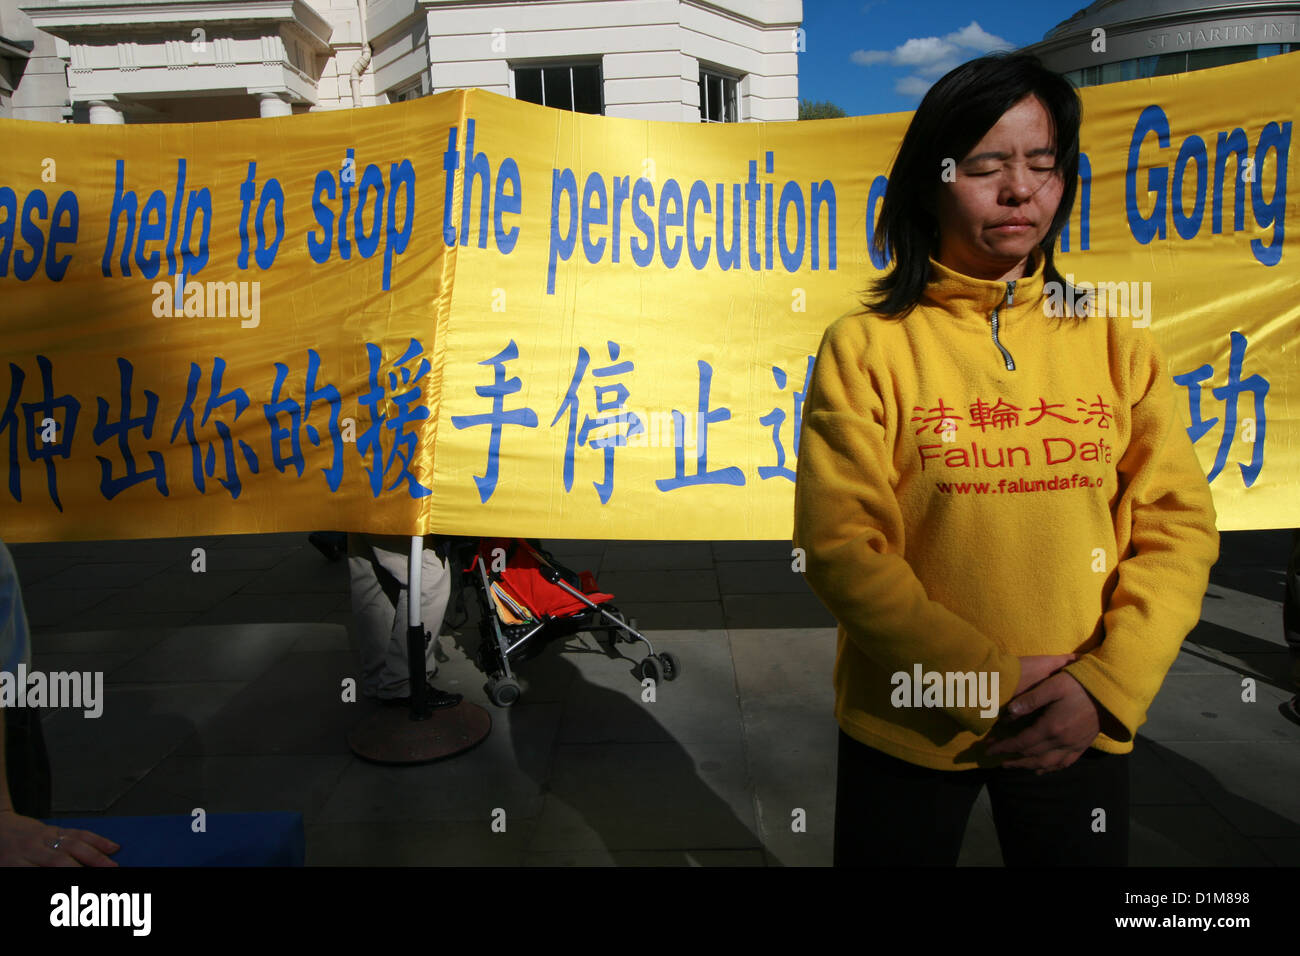 Falun Gong practitioner at a protest against persecution of Falung Gong (Falung Dafa) in China Stock Photo